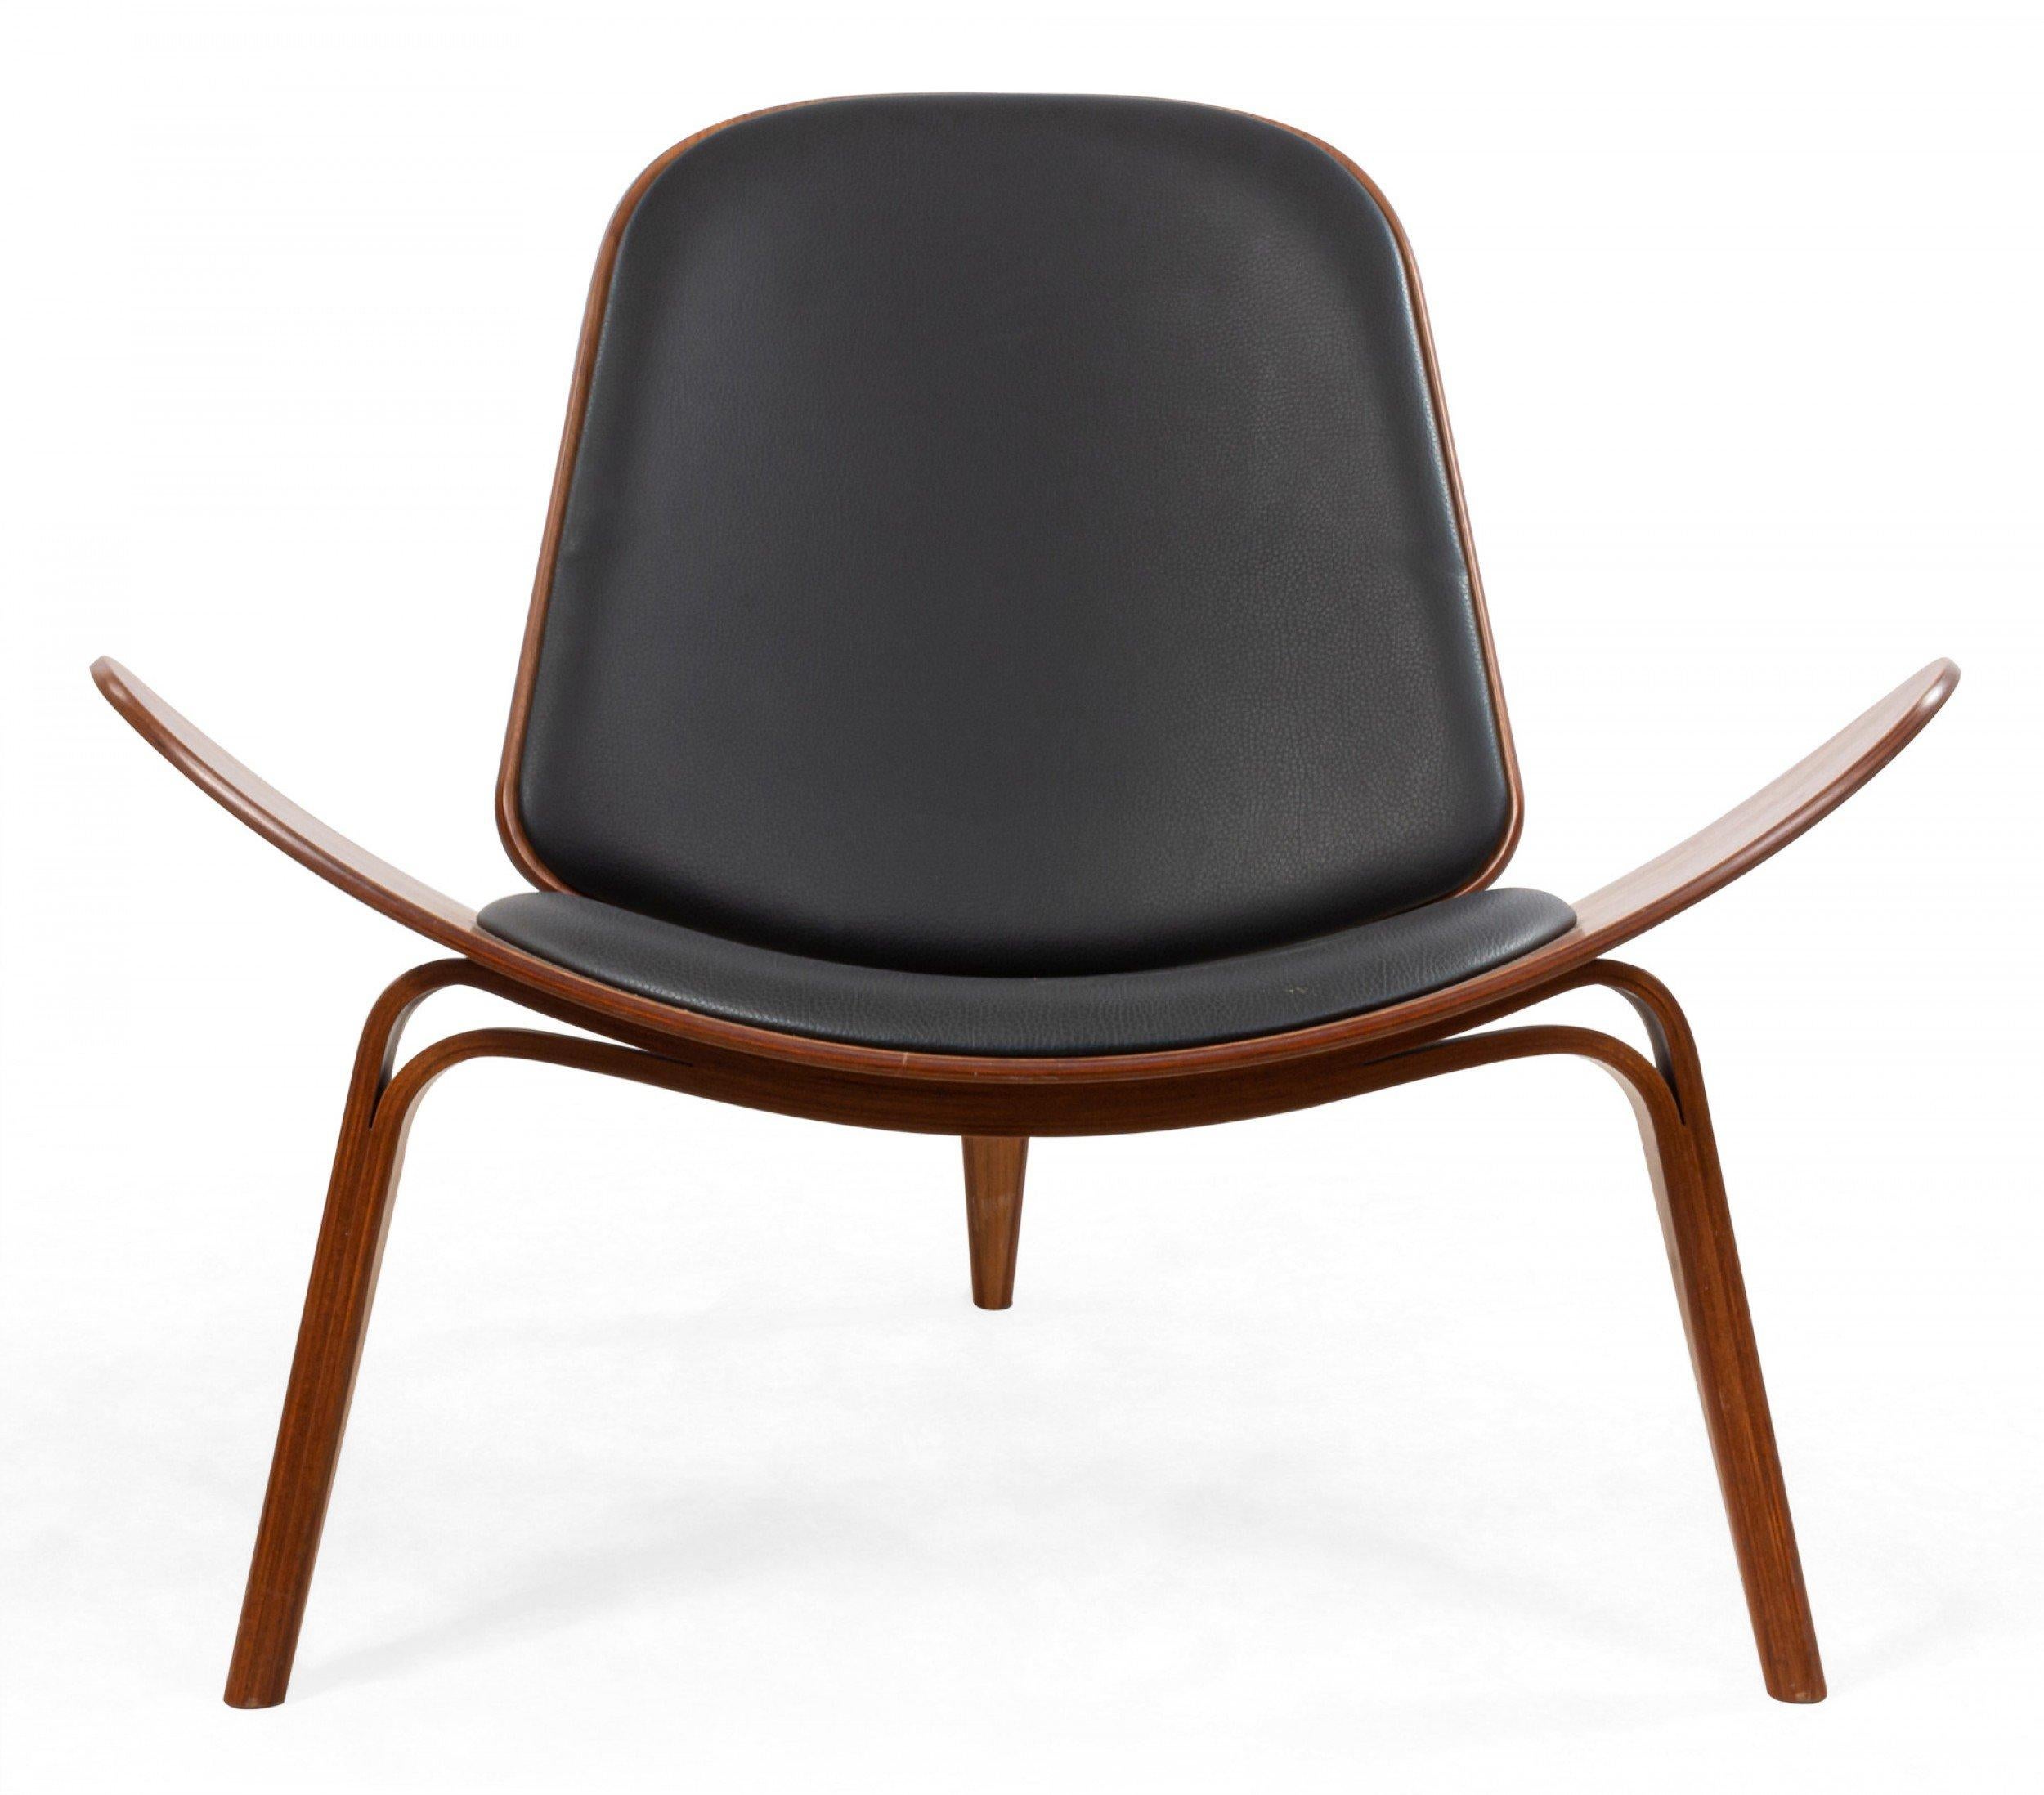 Pair of Hans Wegner for Carl Hansen & Søn CH07 shell chairs with bentwood construction, walnut veneer, lacquered edges, and black leather upholstery, label with serial number attached at base.